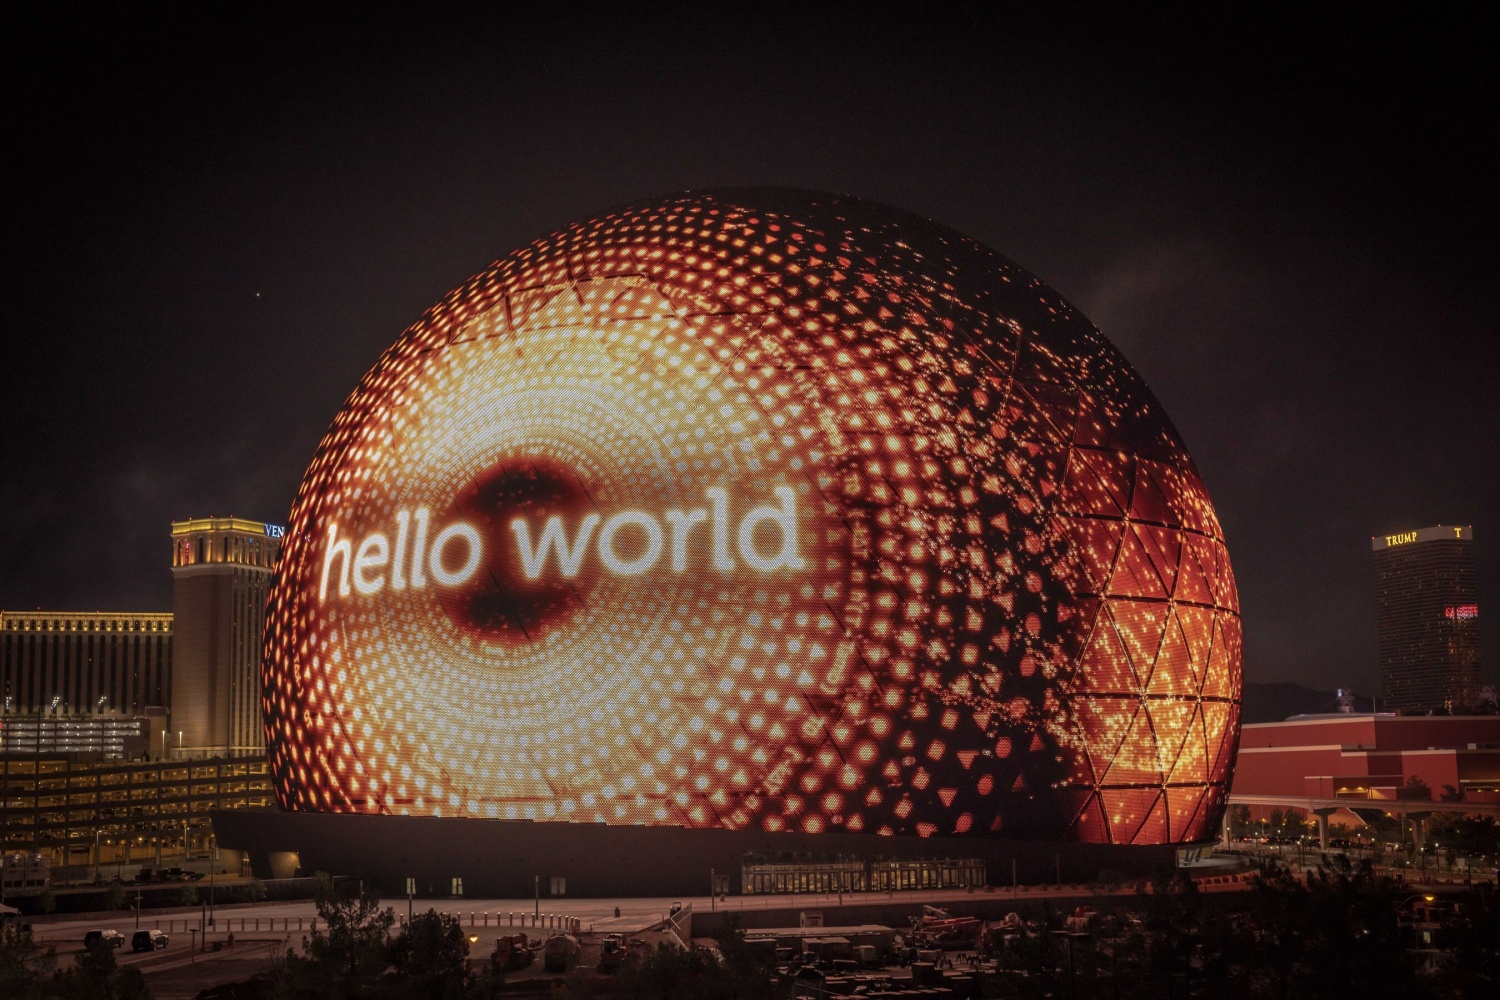 Exosphere: World's Largest Spherical Structure Dazzles in Las Vegas Strip Debut